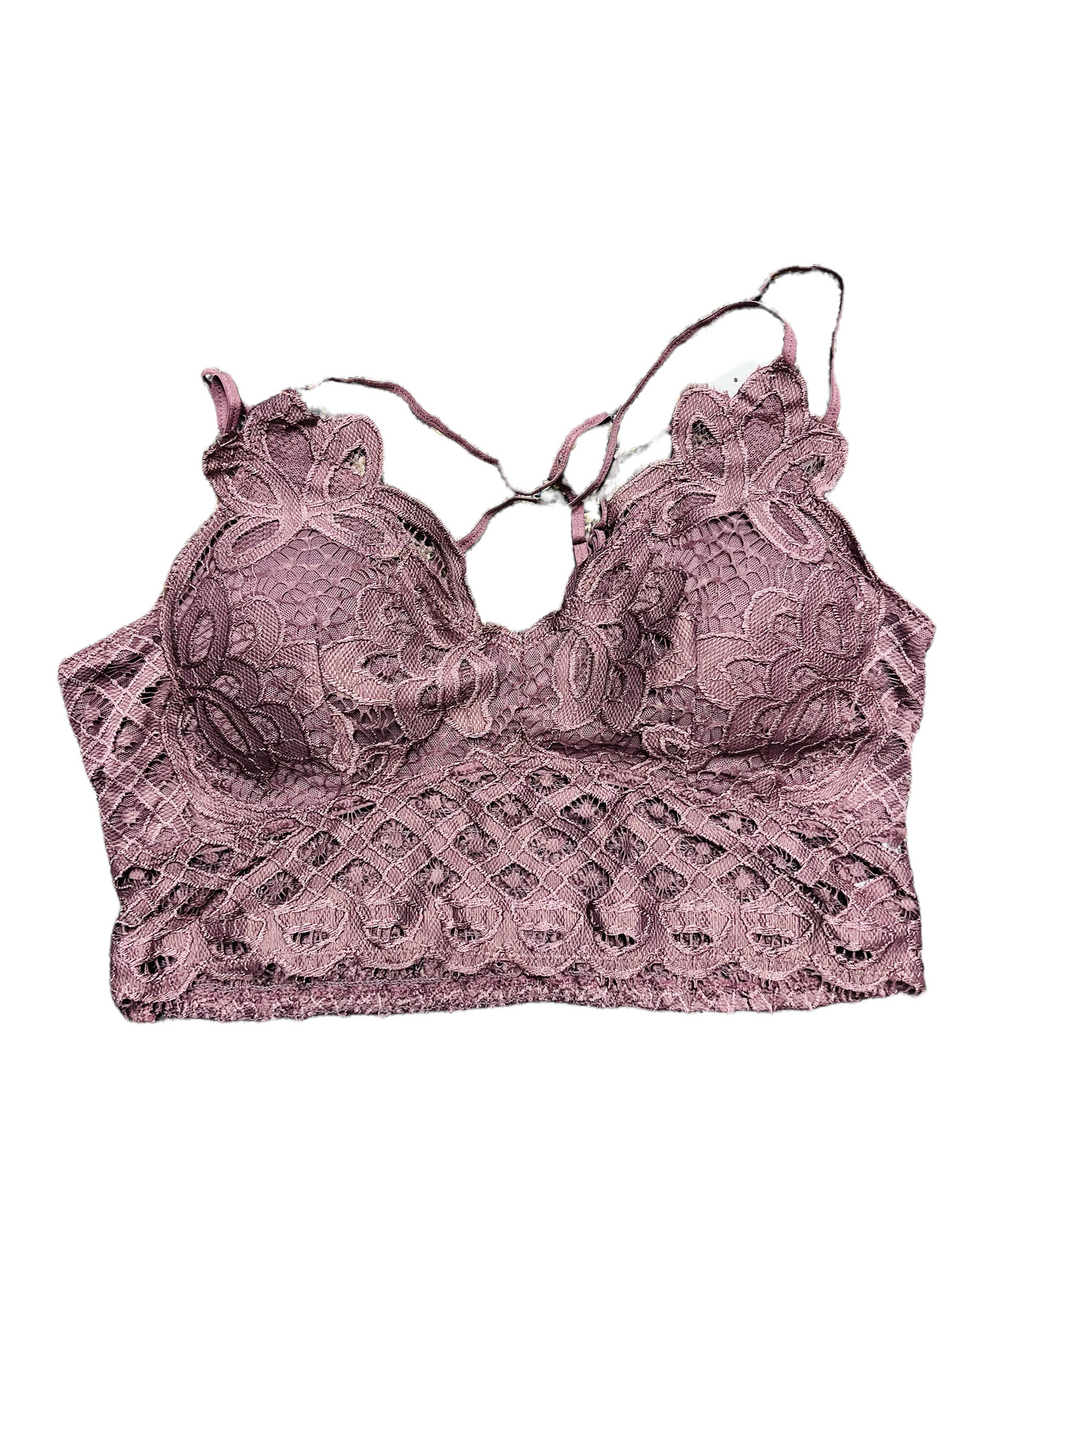 Bralette - Dusty Purple - The Teal Antler Boutique